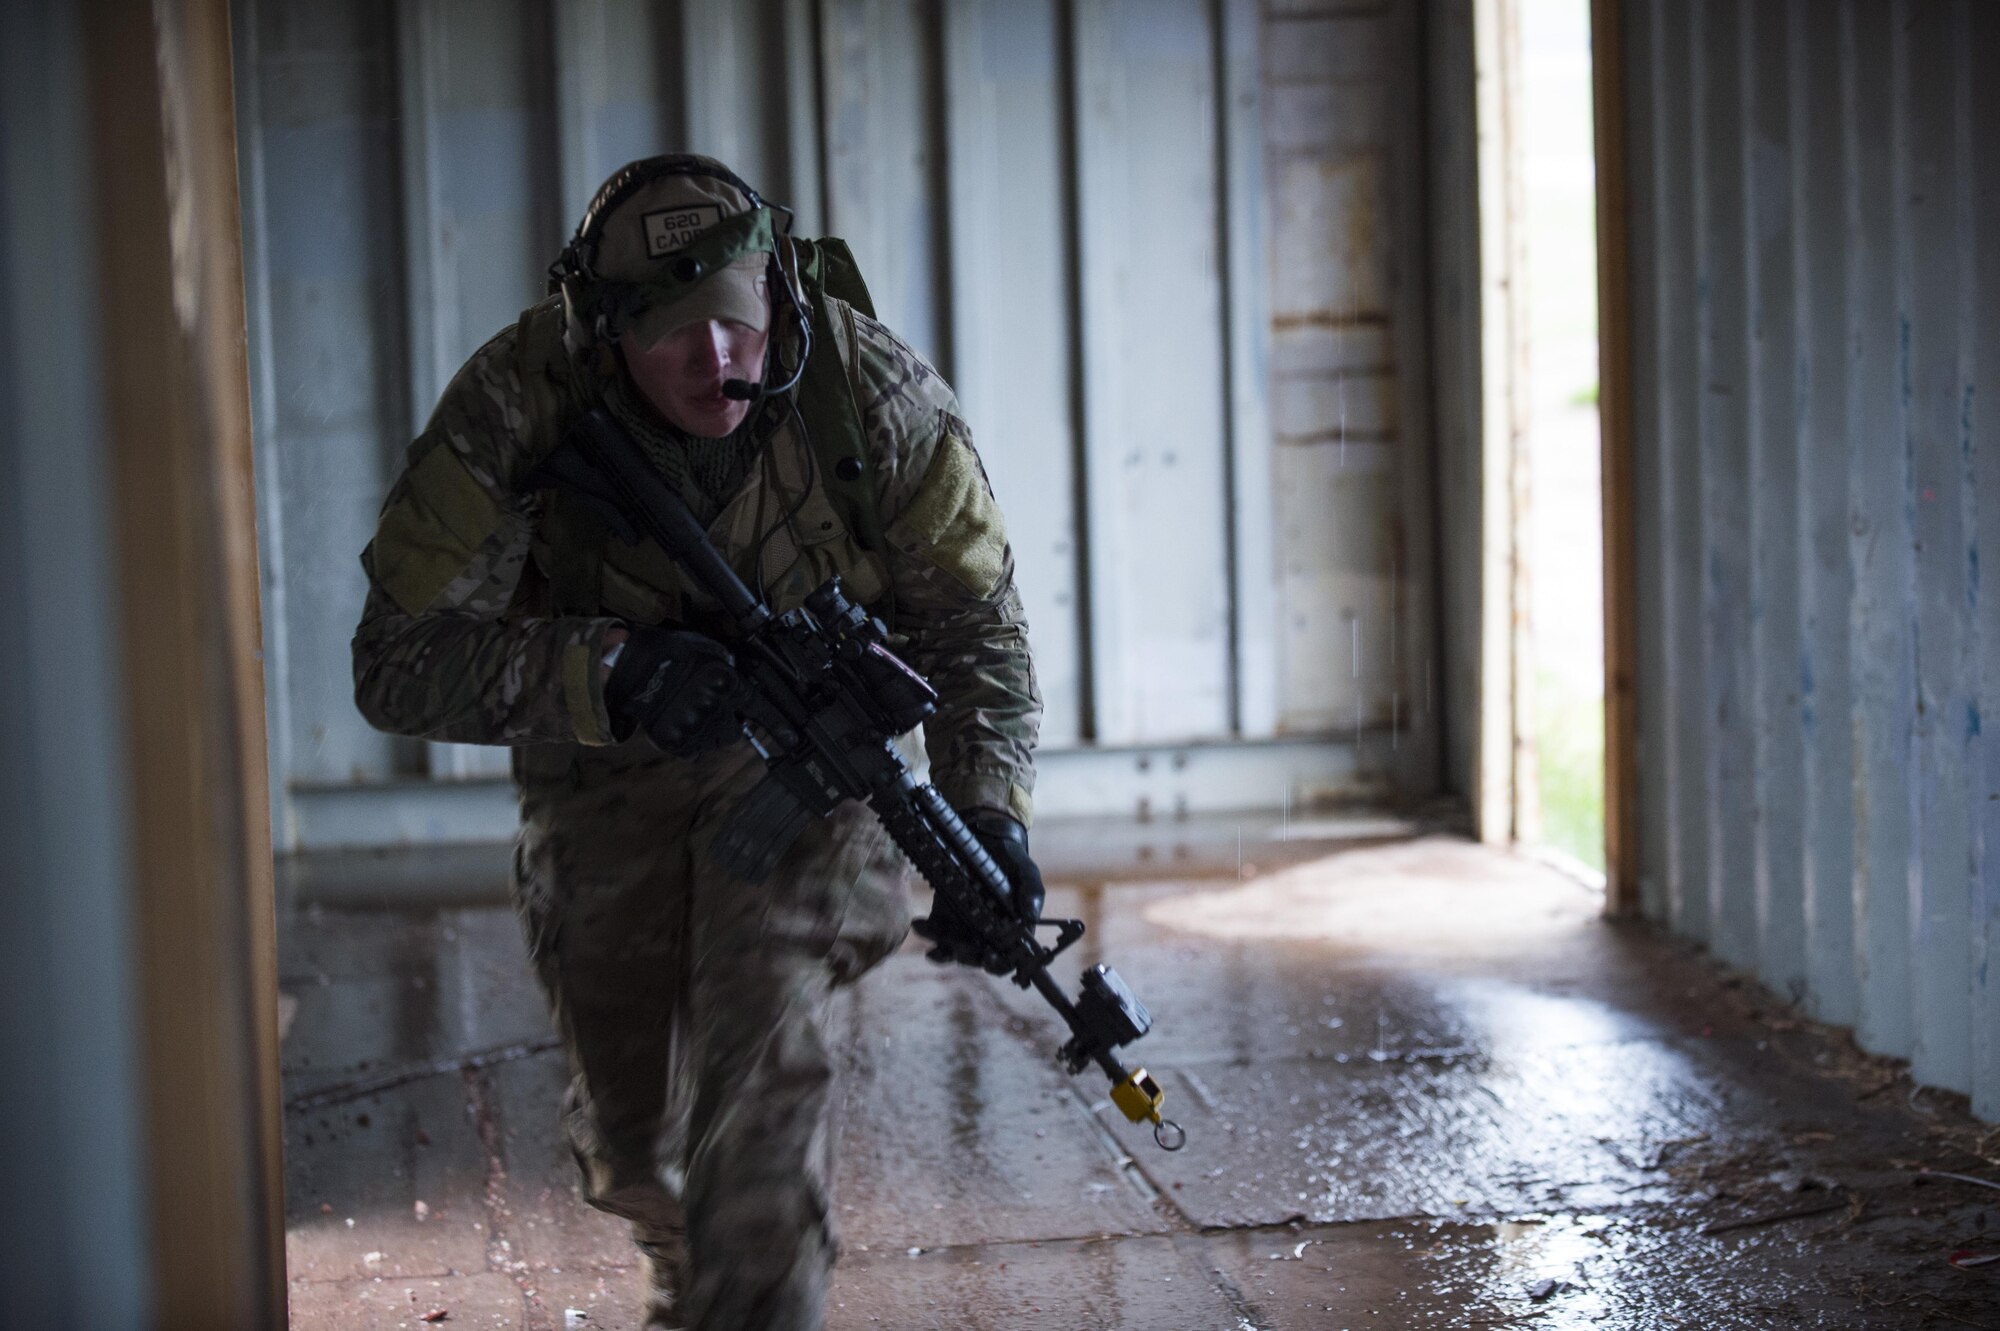 Staff Sgt. Samuel Saintz, 620th Ground Combat Training Squadron formal training instructor, scurries through a facility to get into a fighting position during the 2017 Global Strike Challenge at Camp Guernsey, Wyo., May 18, 2017. The winners from each challenge will be announced in August at the 2017 Global Strike Command Innovation and Technology Symposium in Shreveport, La. (U.S. Air Force photo by Staff Sgt. Christopher Ruano)